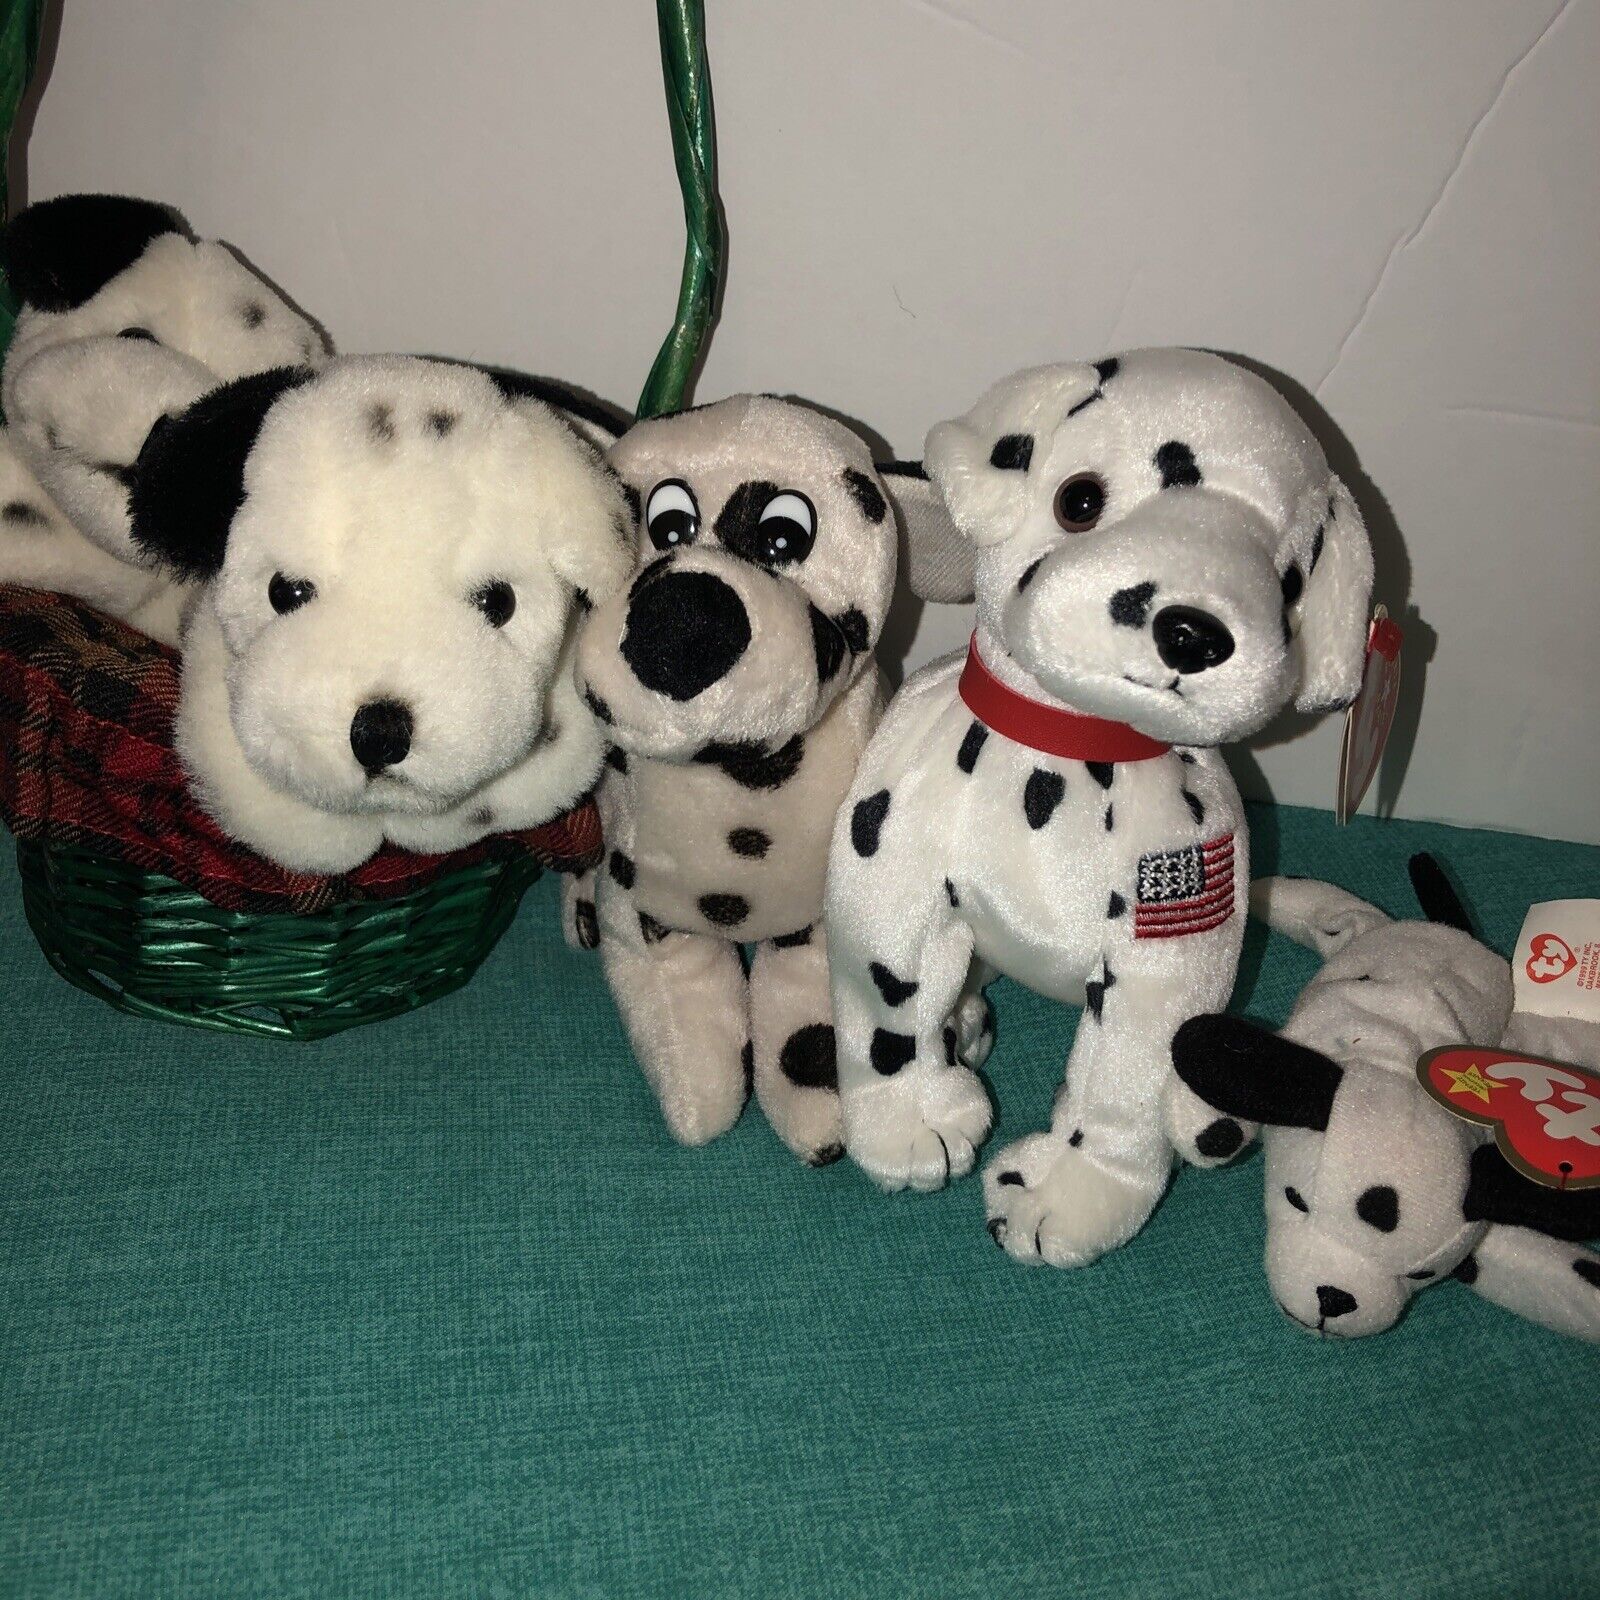 101 Dalmatians Collection Plush Puppies 5 Pups Shown 567 Th Imperial